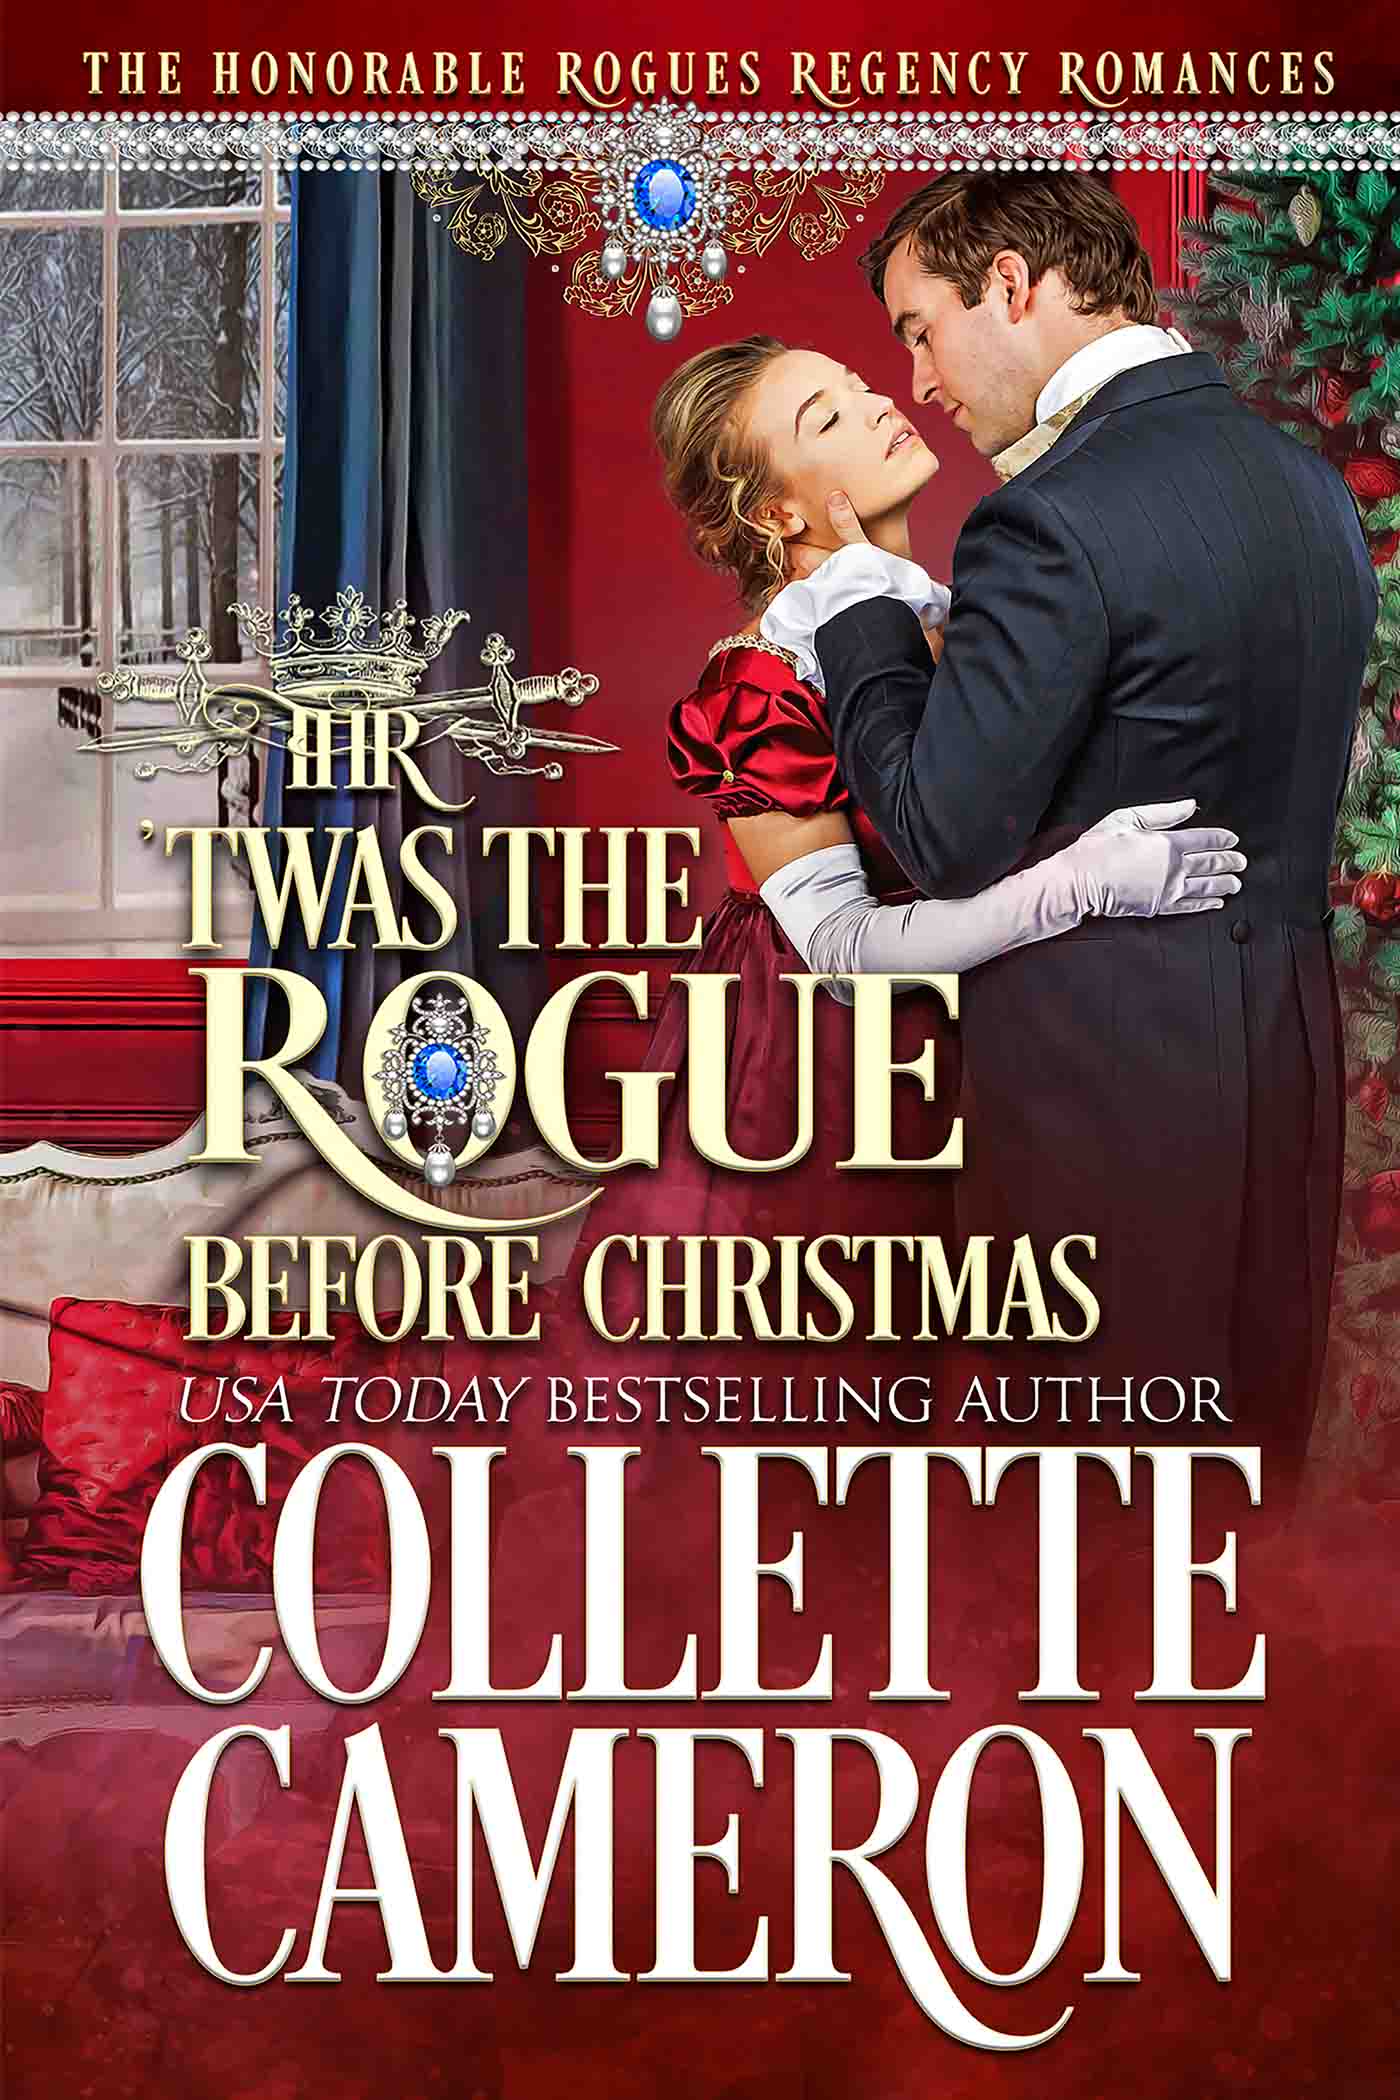 'Twas the Rogue Before Christmas, Historical Romance, Bestselling Regency Romance, Must read Regency romance novel, Christmas historical romance book, Christmas historical romance novel, Collette Cameron Regency Romance novels, Collette Cameron, Collette Cameron Historical Romance Novels, Sweet historical romance, The Honorable Rogues Series, Clean historical romance, clean regency romance novel, forbidden love, class difference, holiday Regency Romance, Holiday Historical romance, enemies to lovers